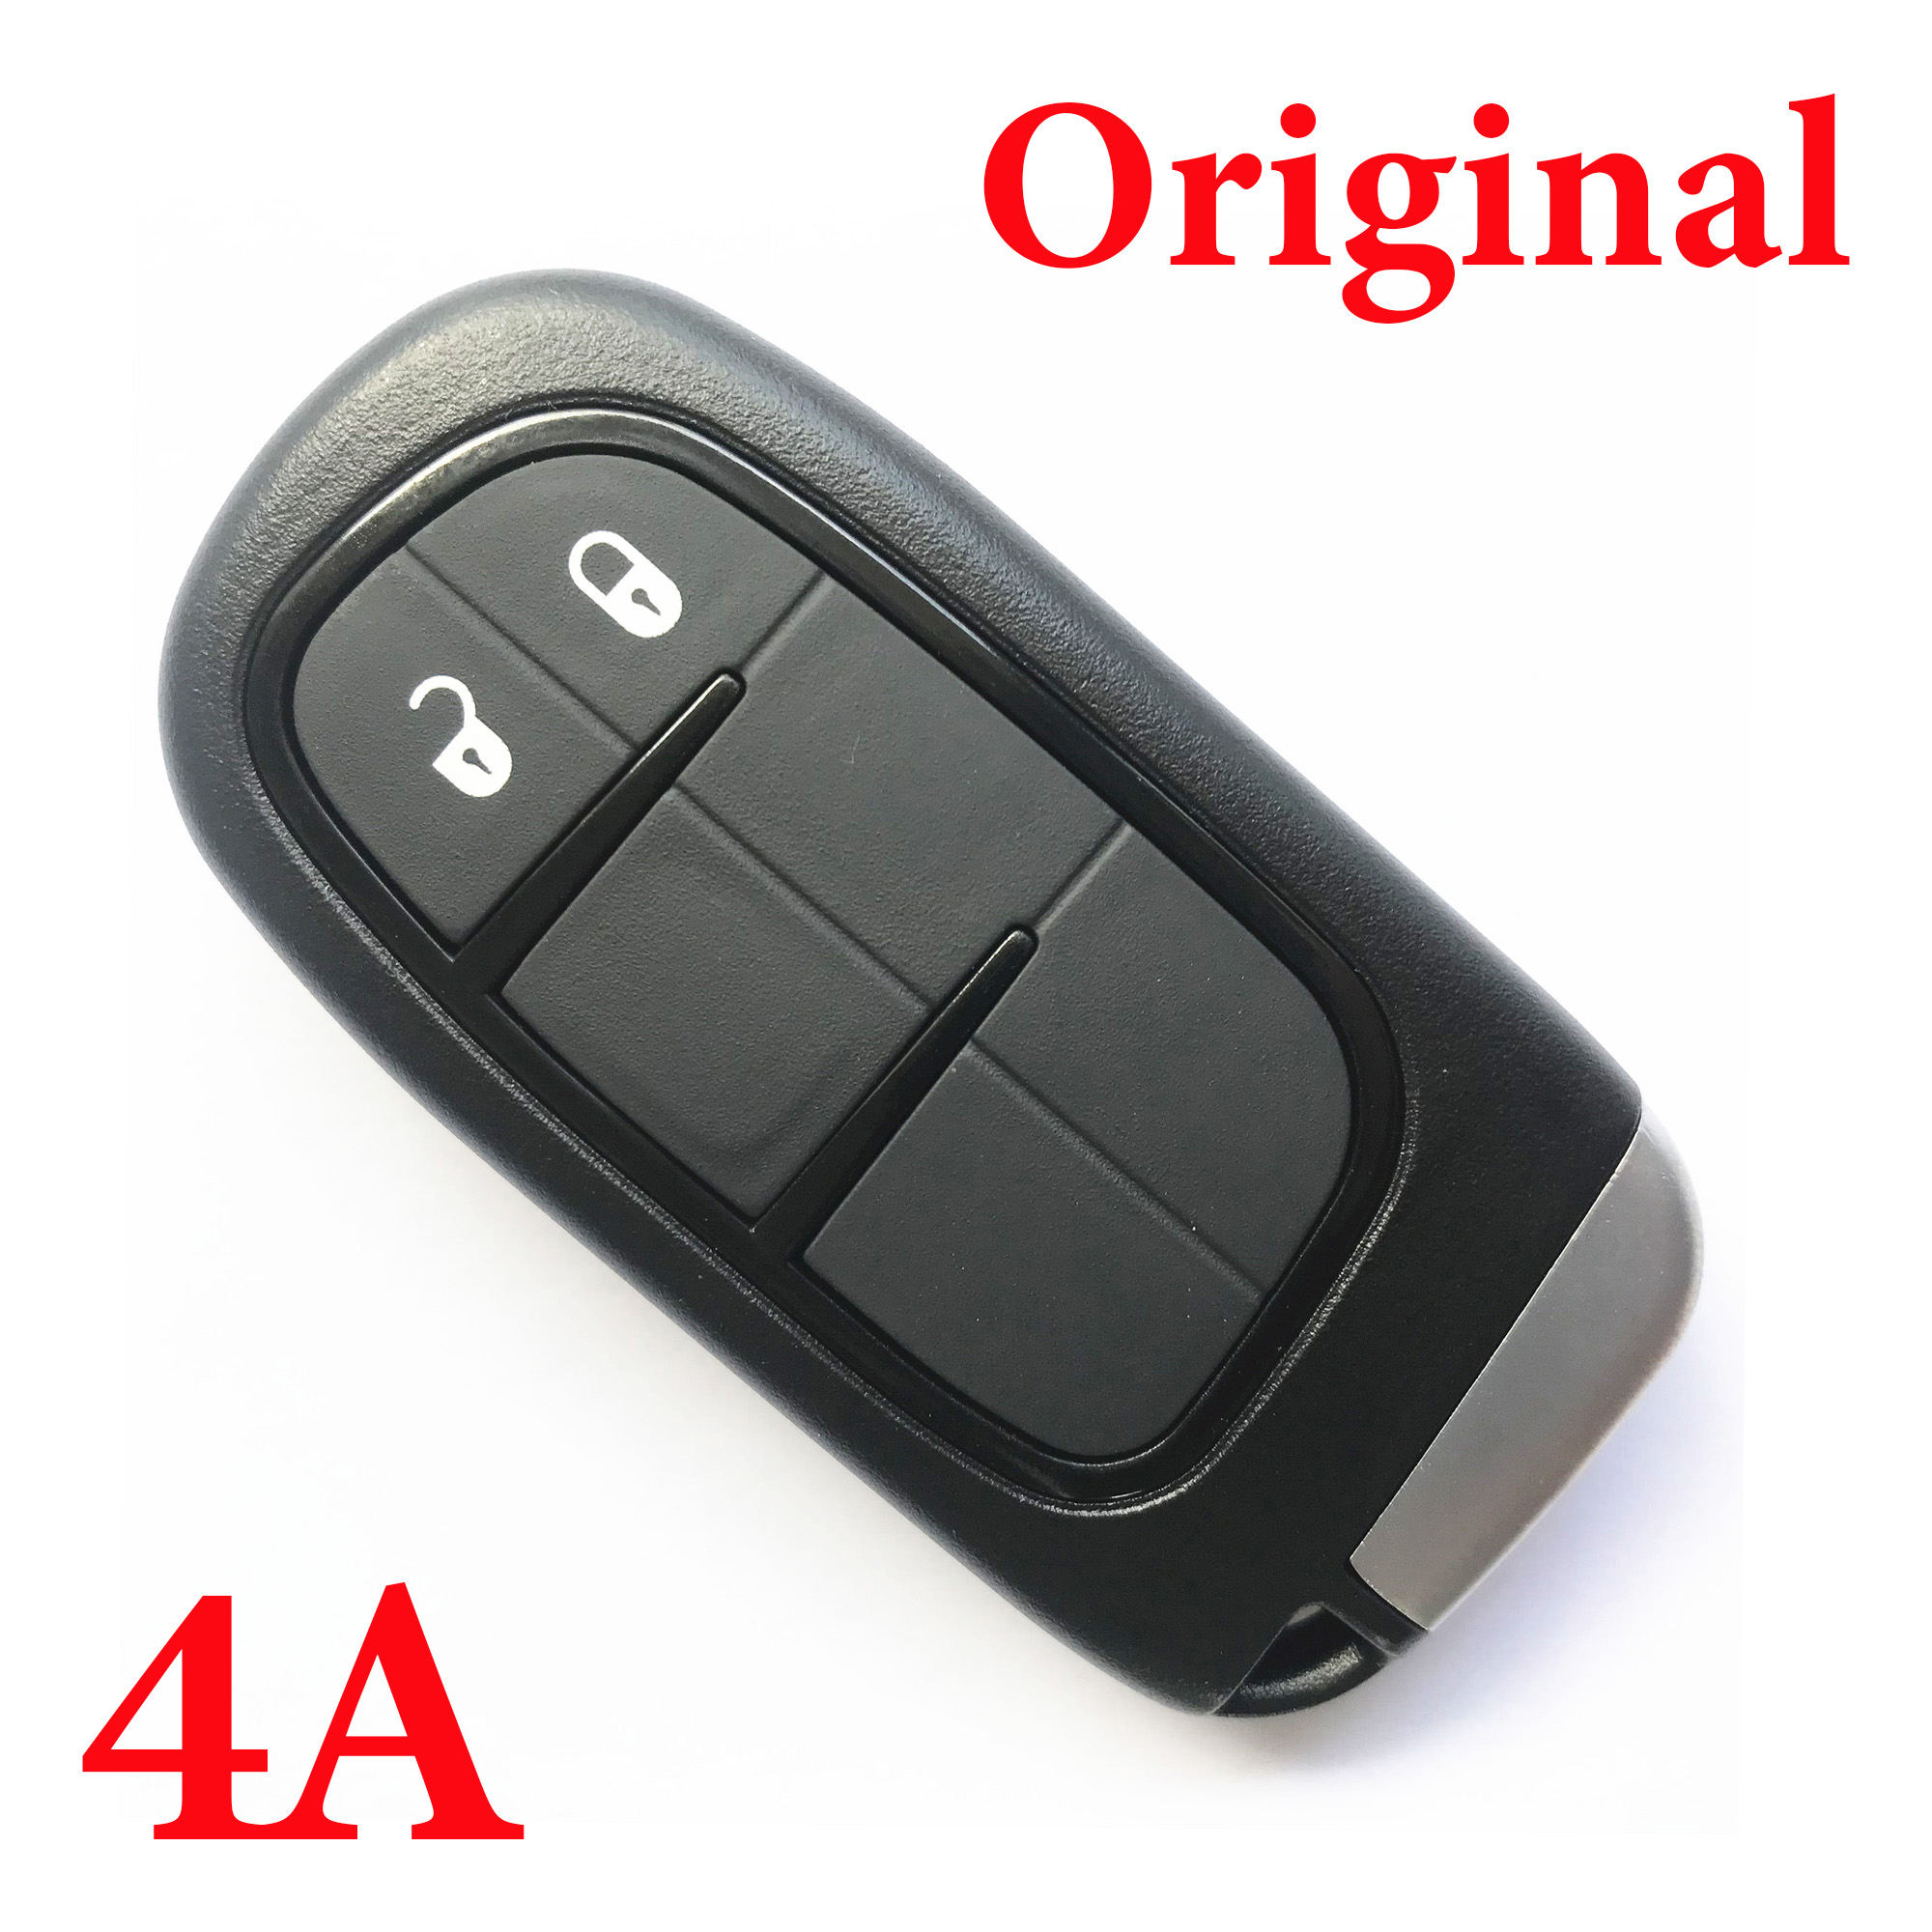 Original 434 MHz 2 Buttons Smart Proximity Key for Jeep Cherokee 2014-2018 GQ4-54T  - 4A Chip